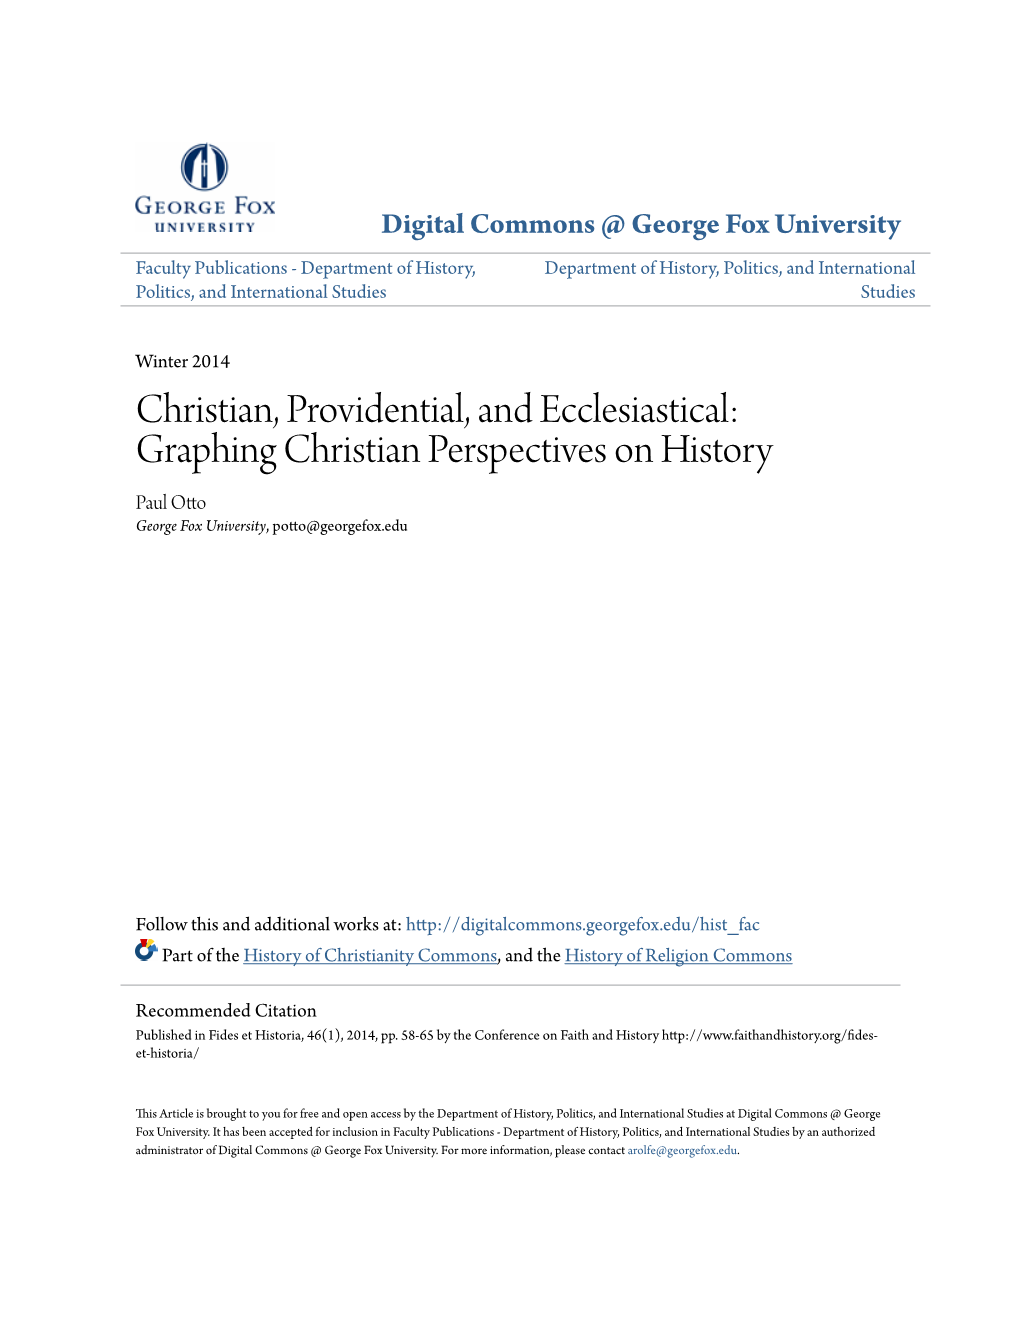 Graphing Christian Perspectives on History Paul Otto George Fox University, Potto@Georgefox.Edu